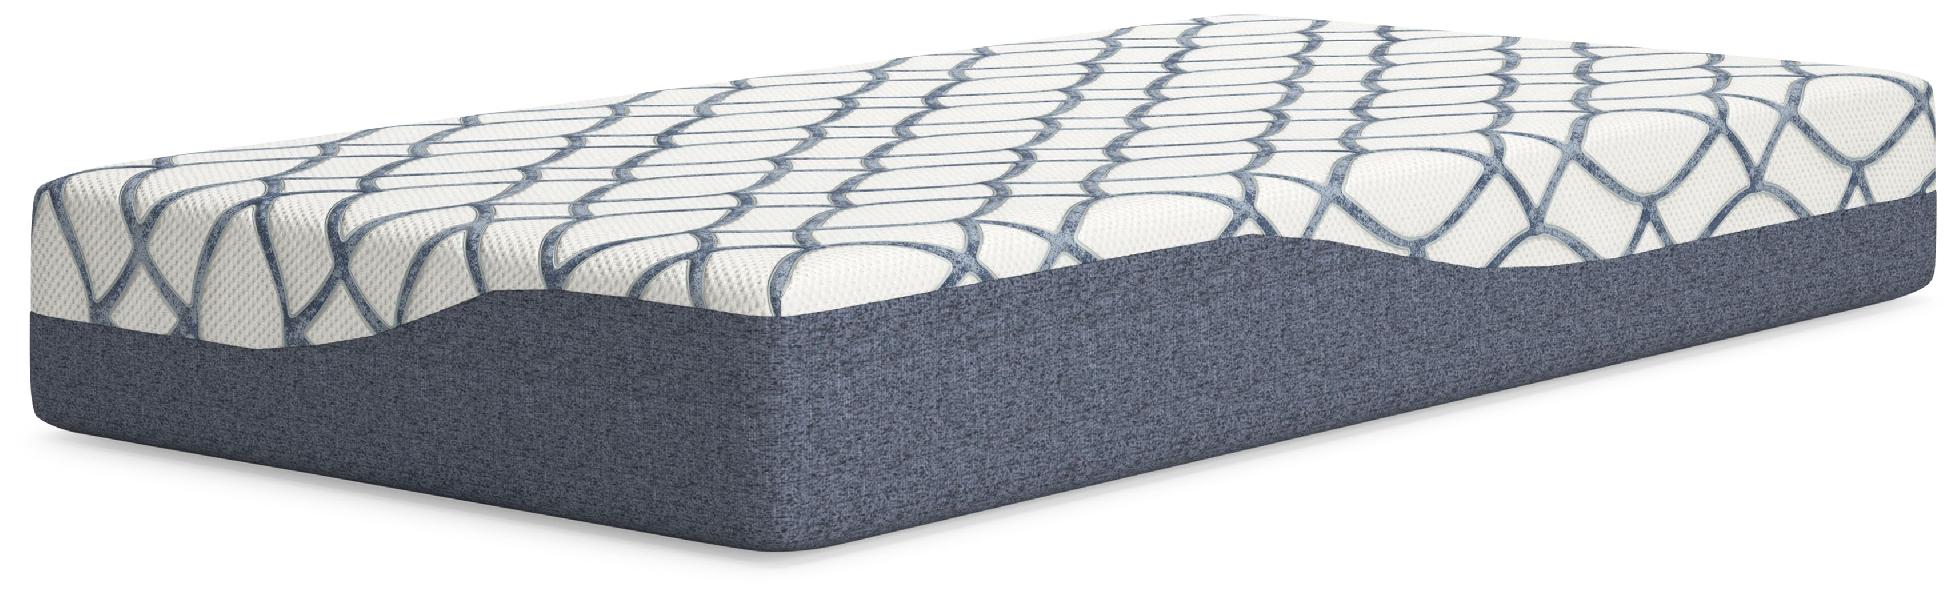 Image of 10 Inch Chime Elite 2.0 - White / Blue - Twin Mattress